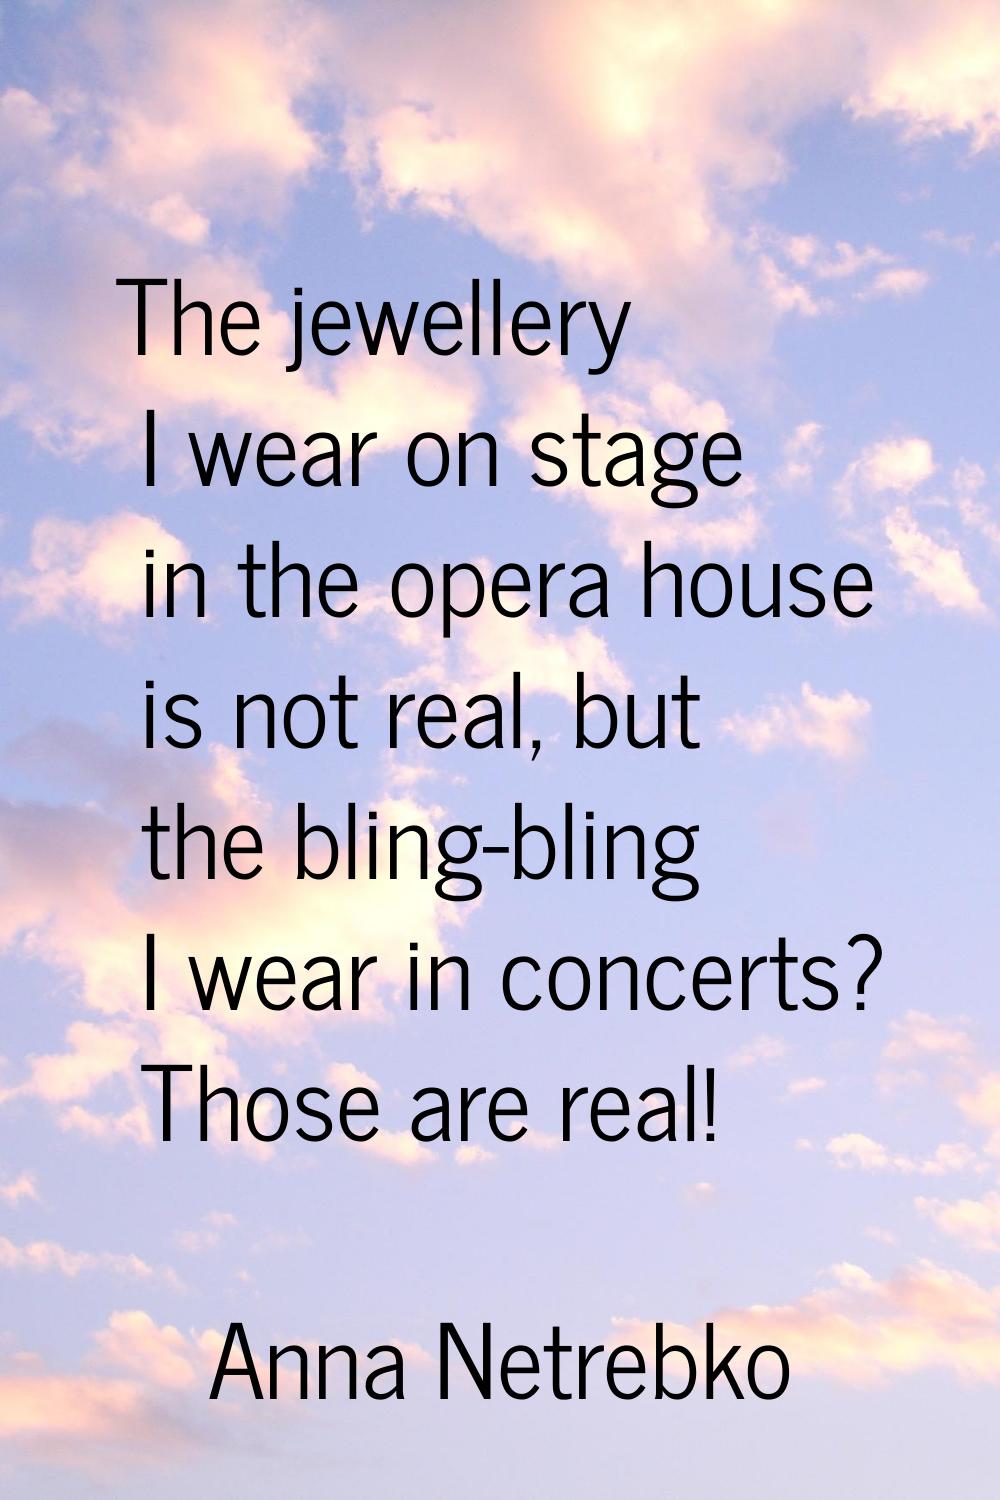 The jewellery I wear on stage in the opera house is not real, but the bling-bling I wear in concert